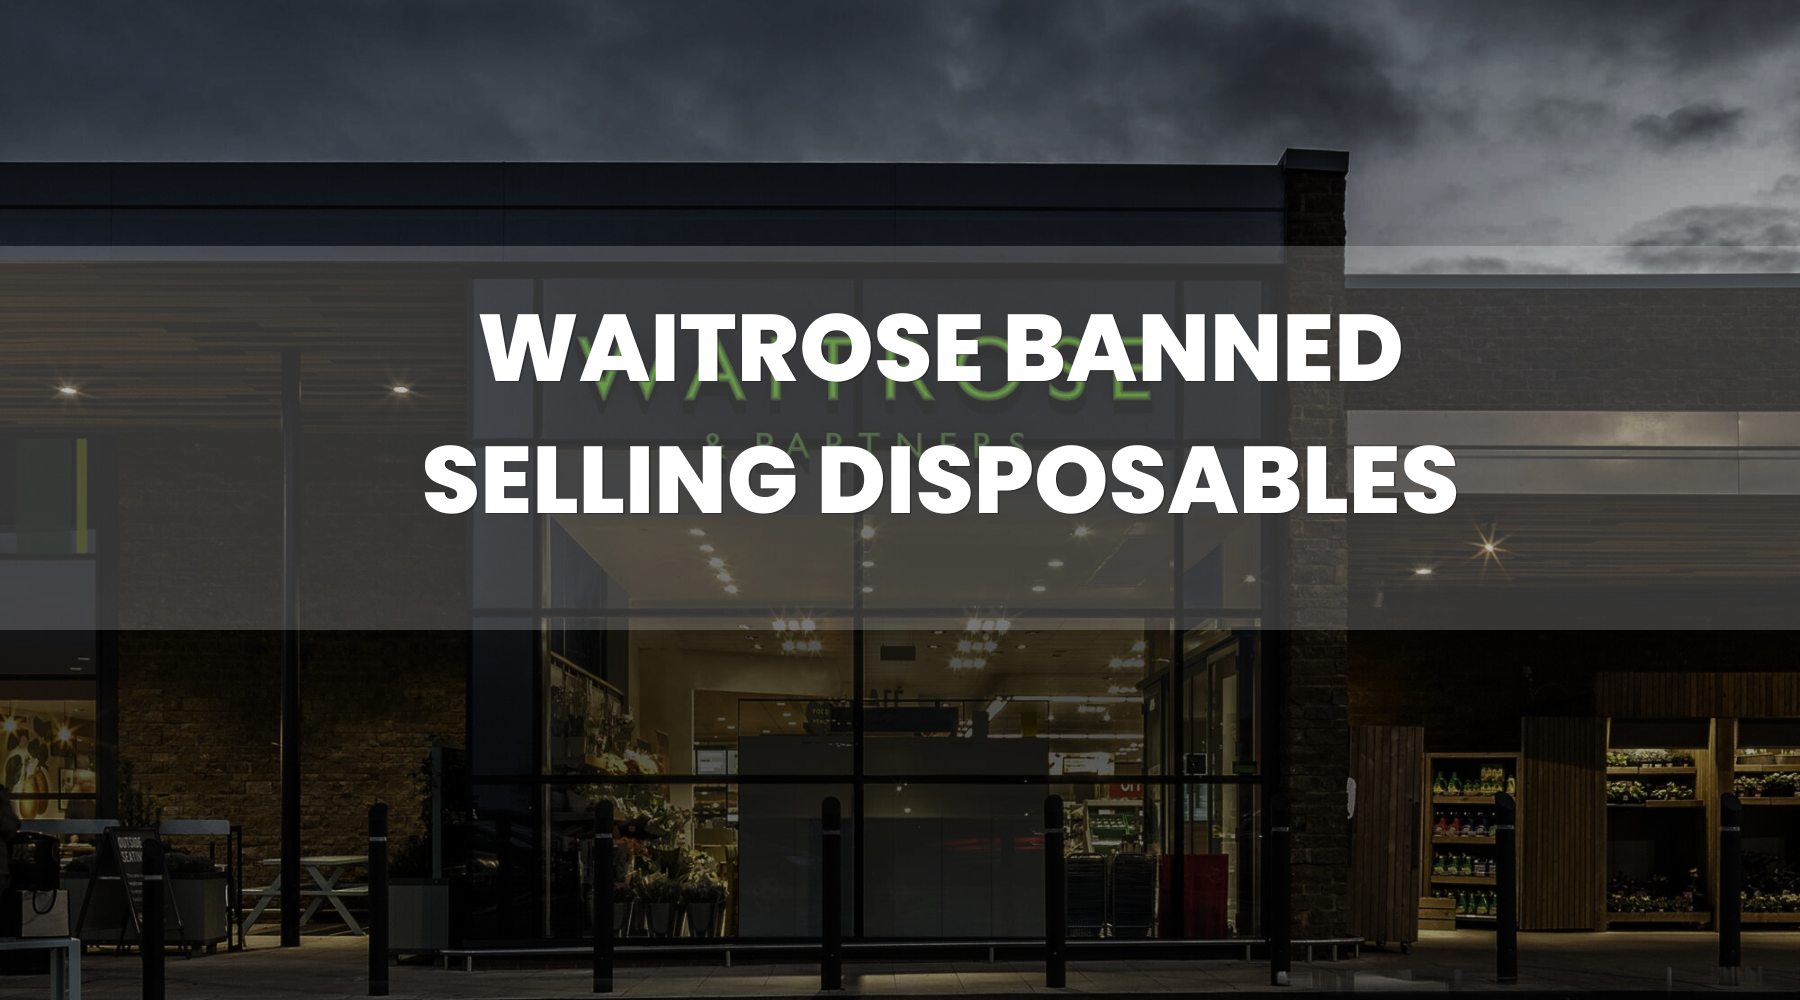 Waitrose Banned Selling Disposable Vapes in Their Stores in January 2023